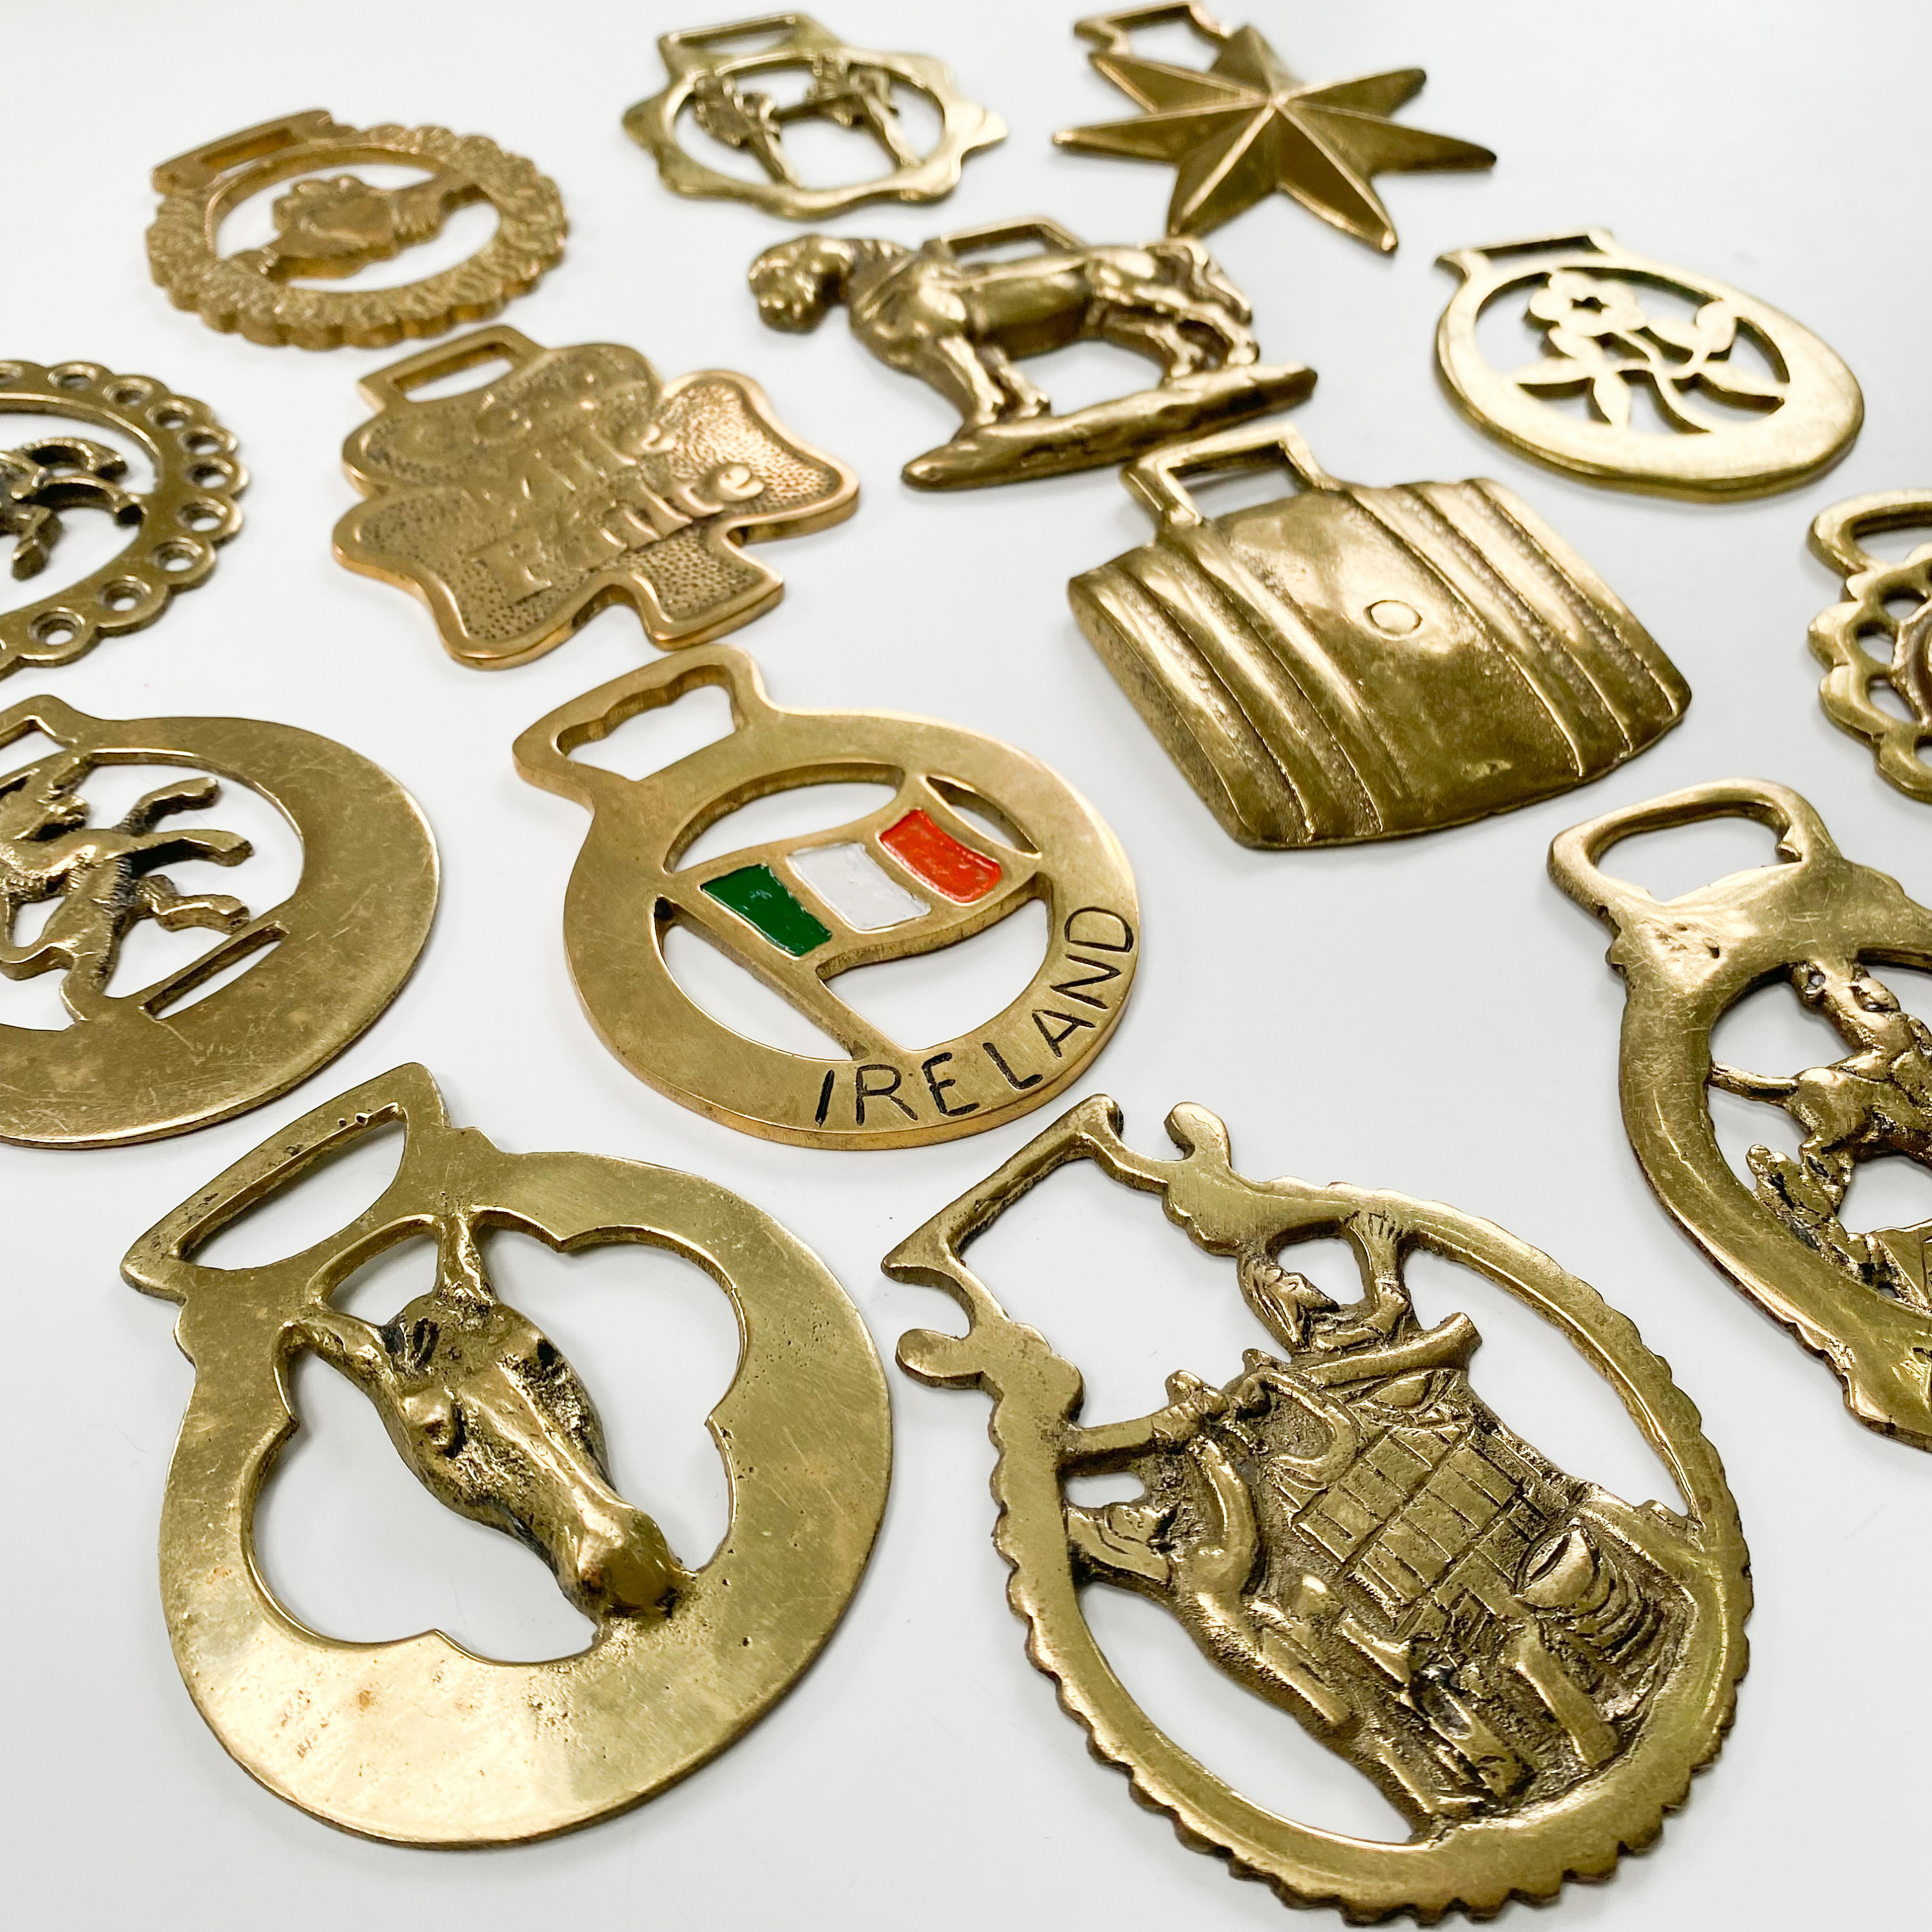 Vintage English Horse Brass Medallions Sold Individually, Brass Bridle  Harness Medals, Antique Vintage Horse Brass Ornaments Made in England 